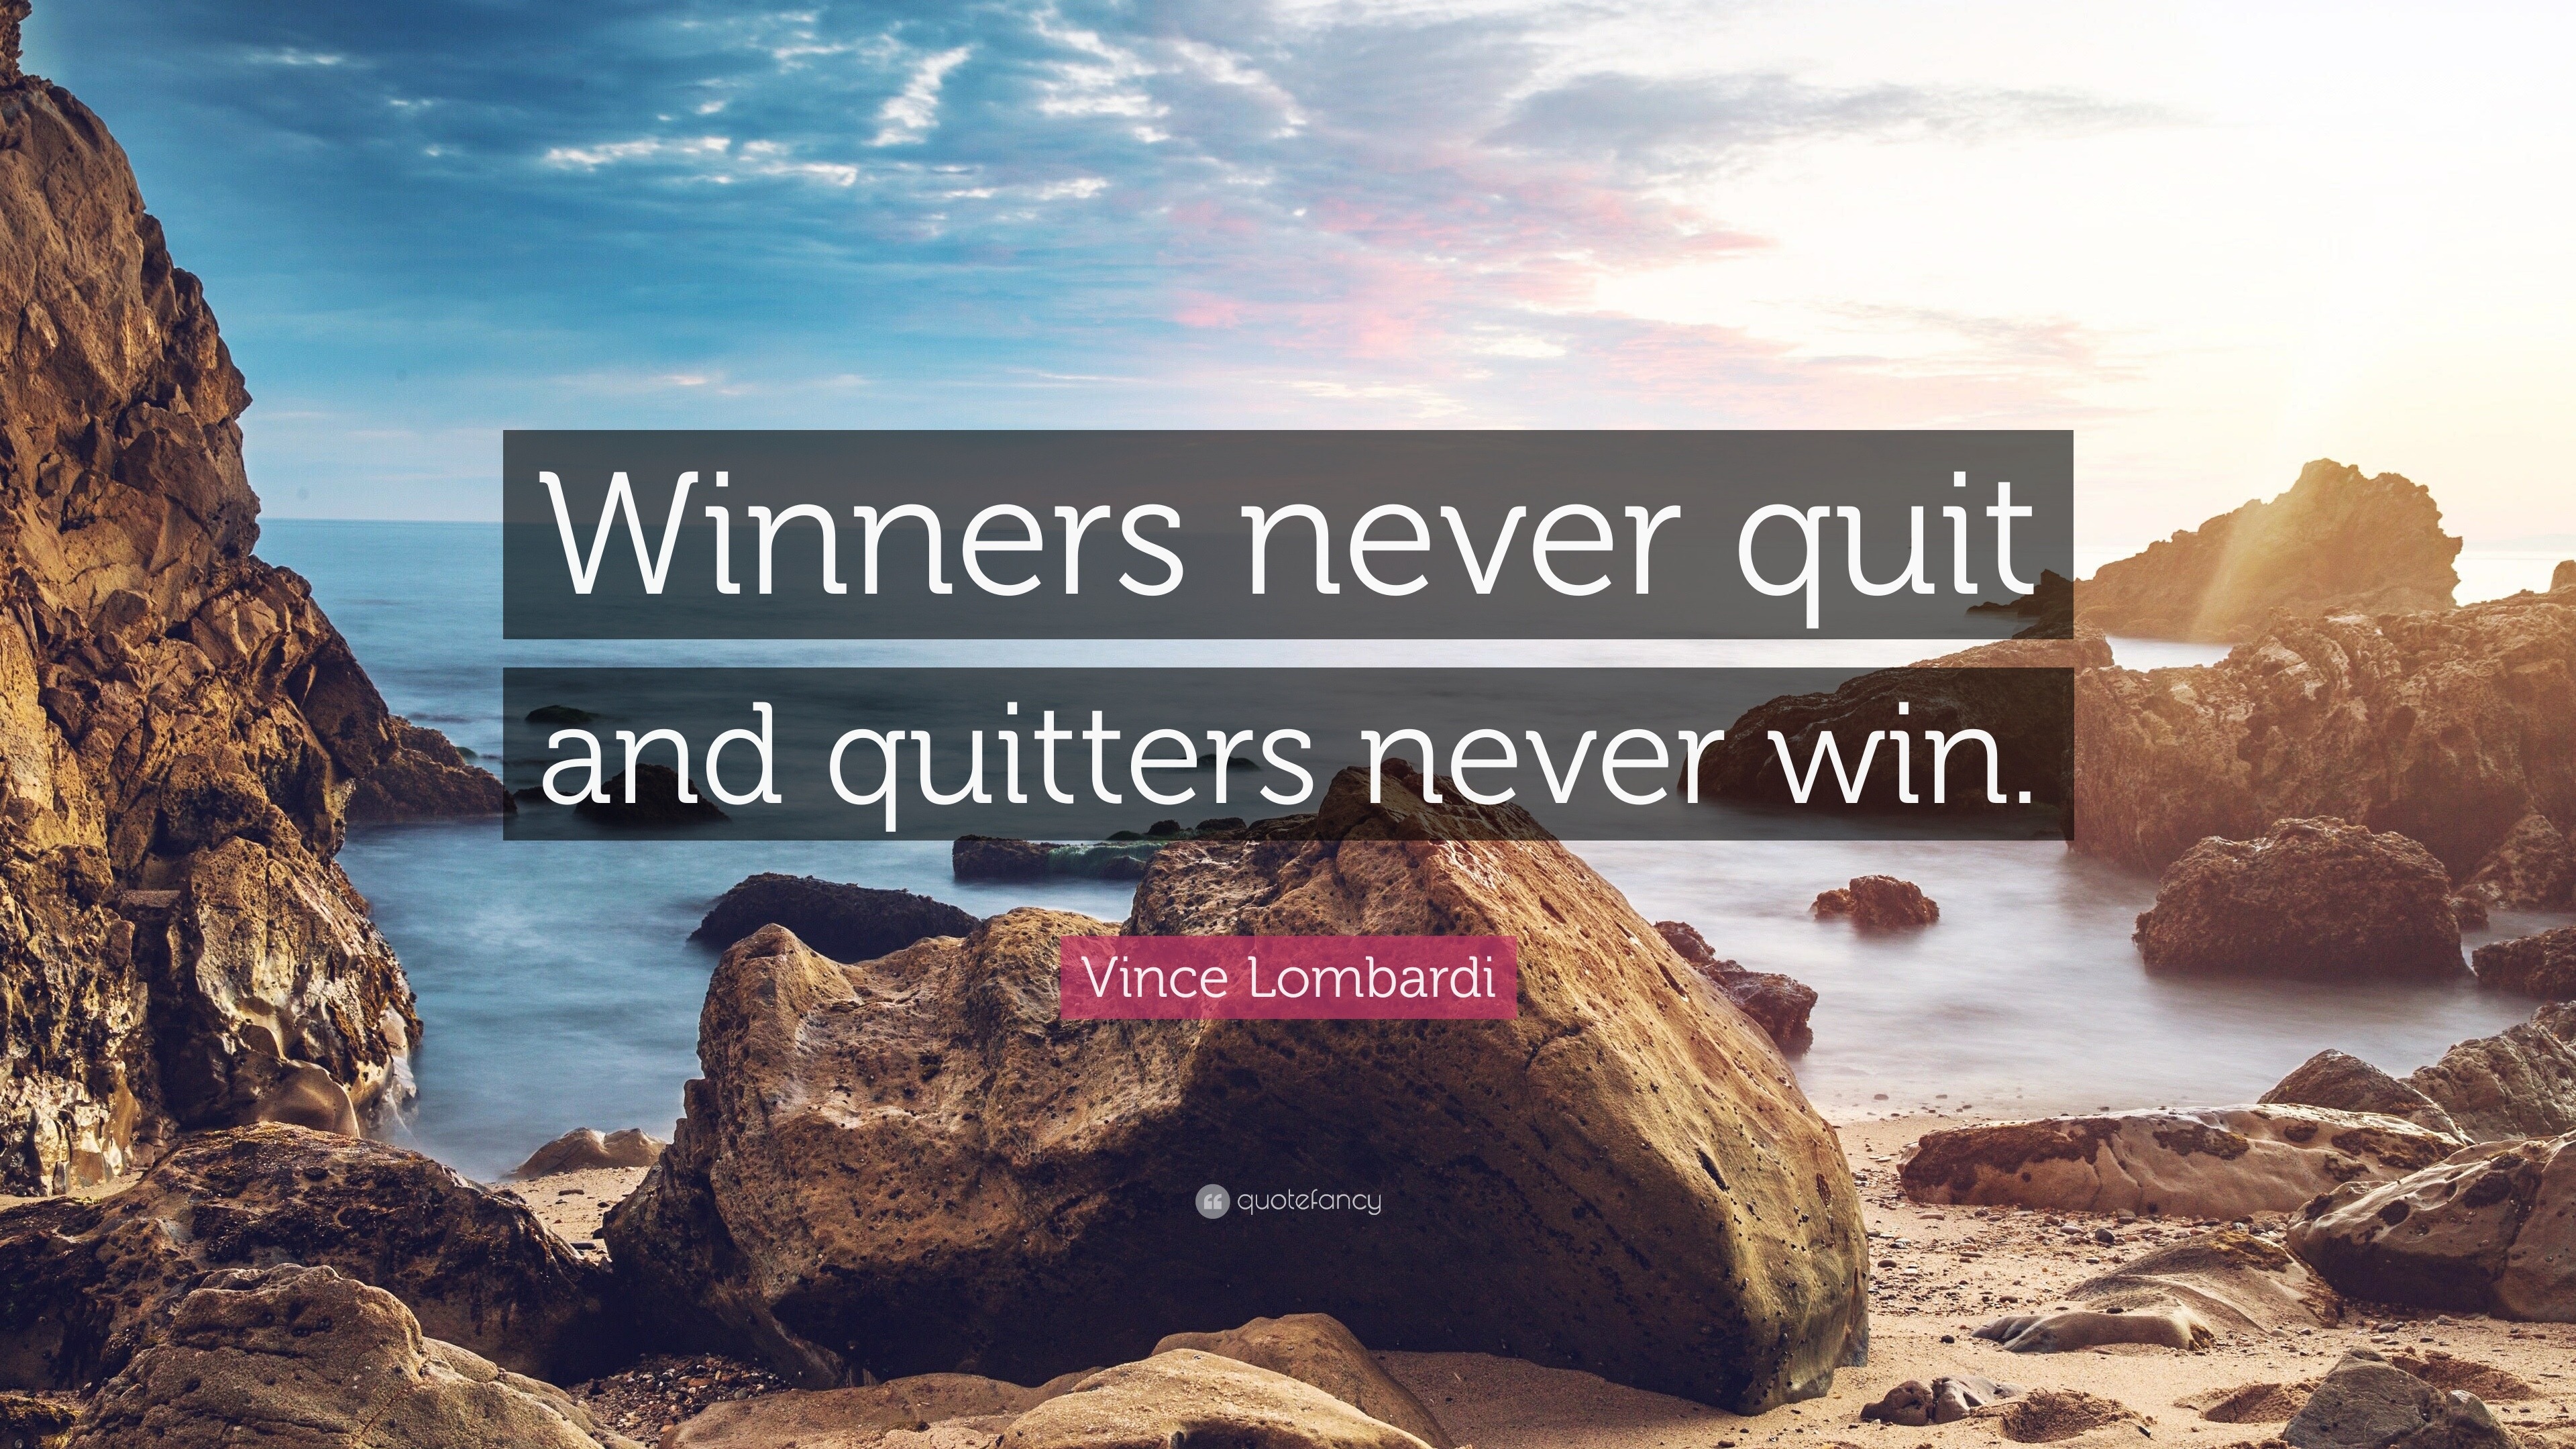 a quitter never wins and a winner never quits